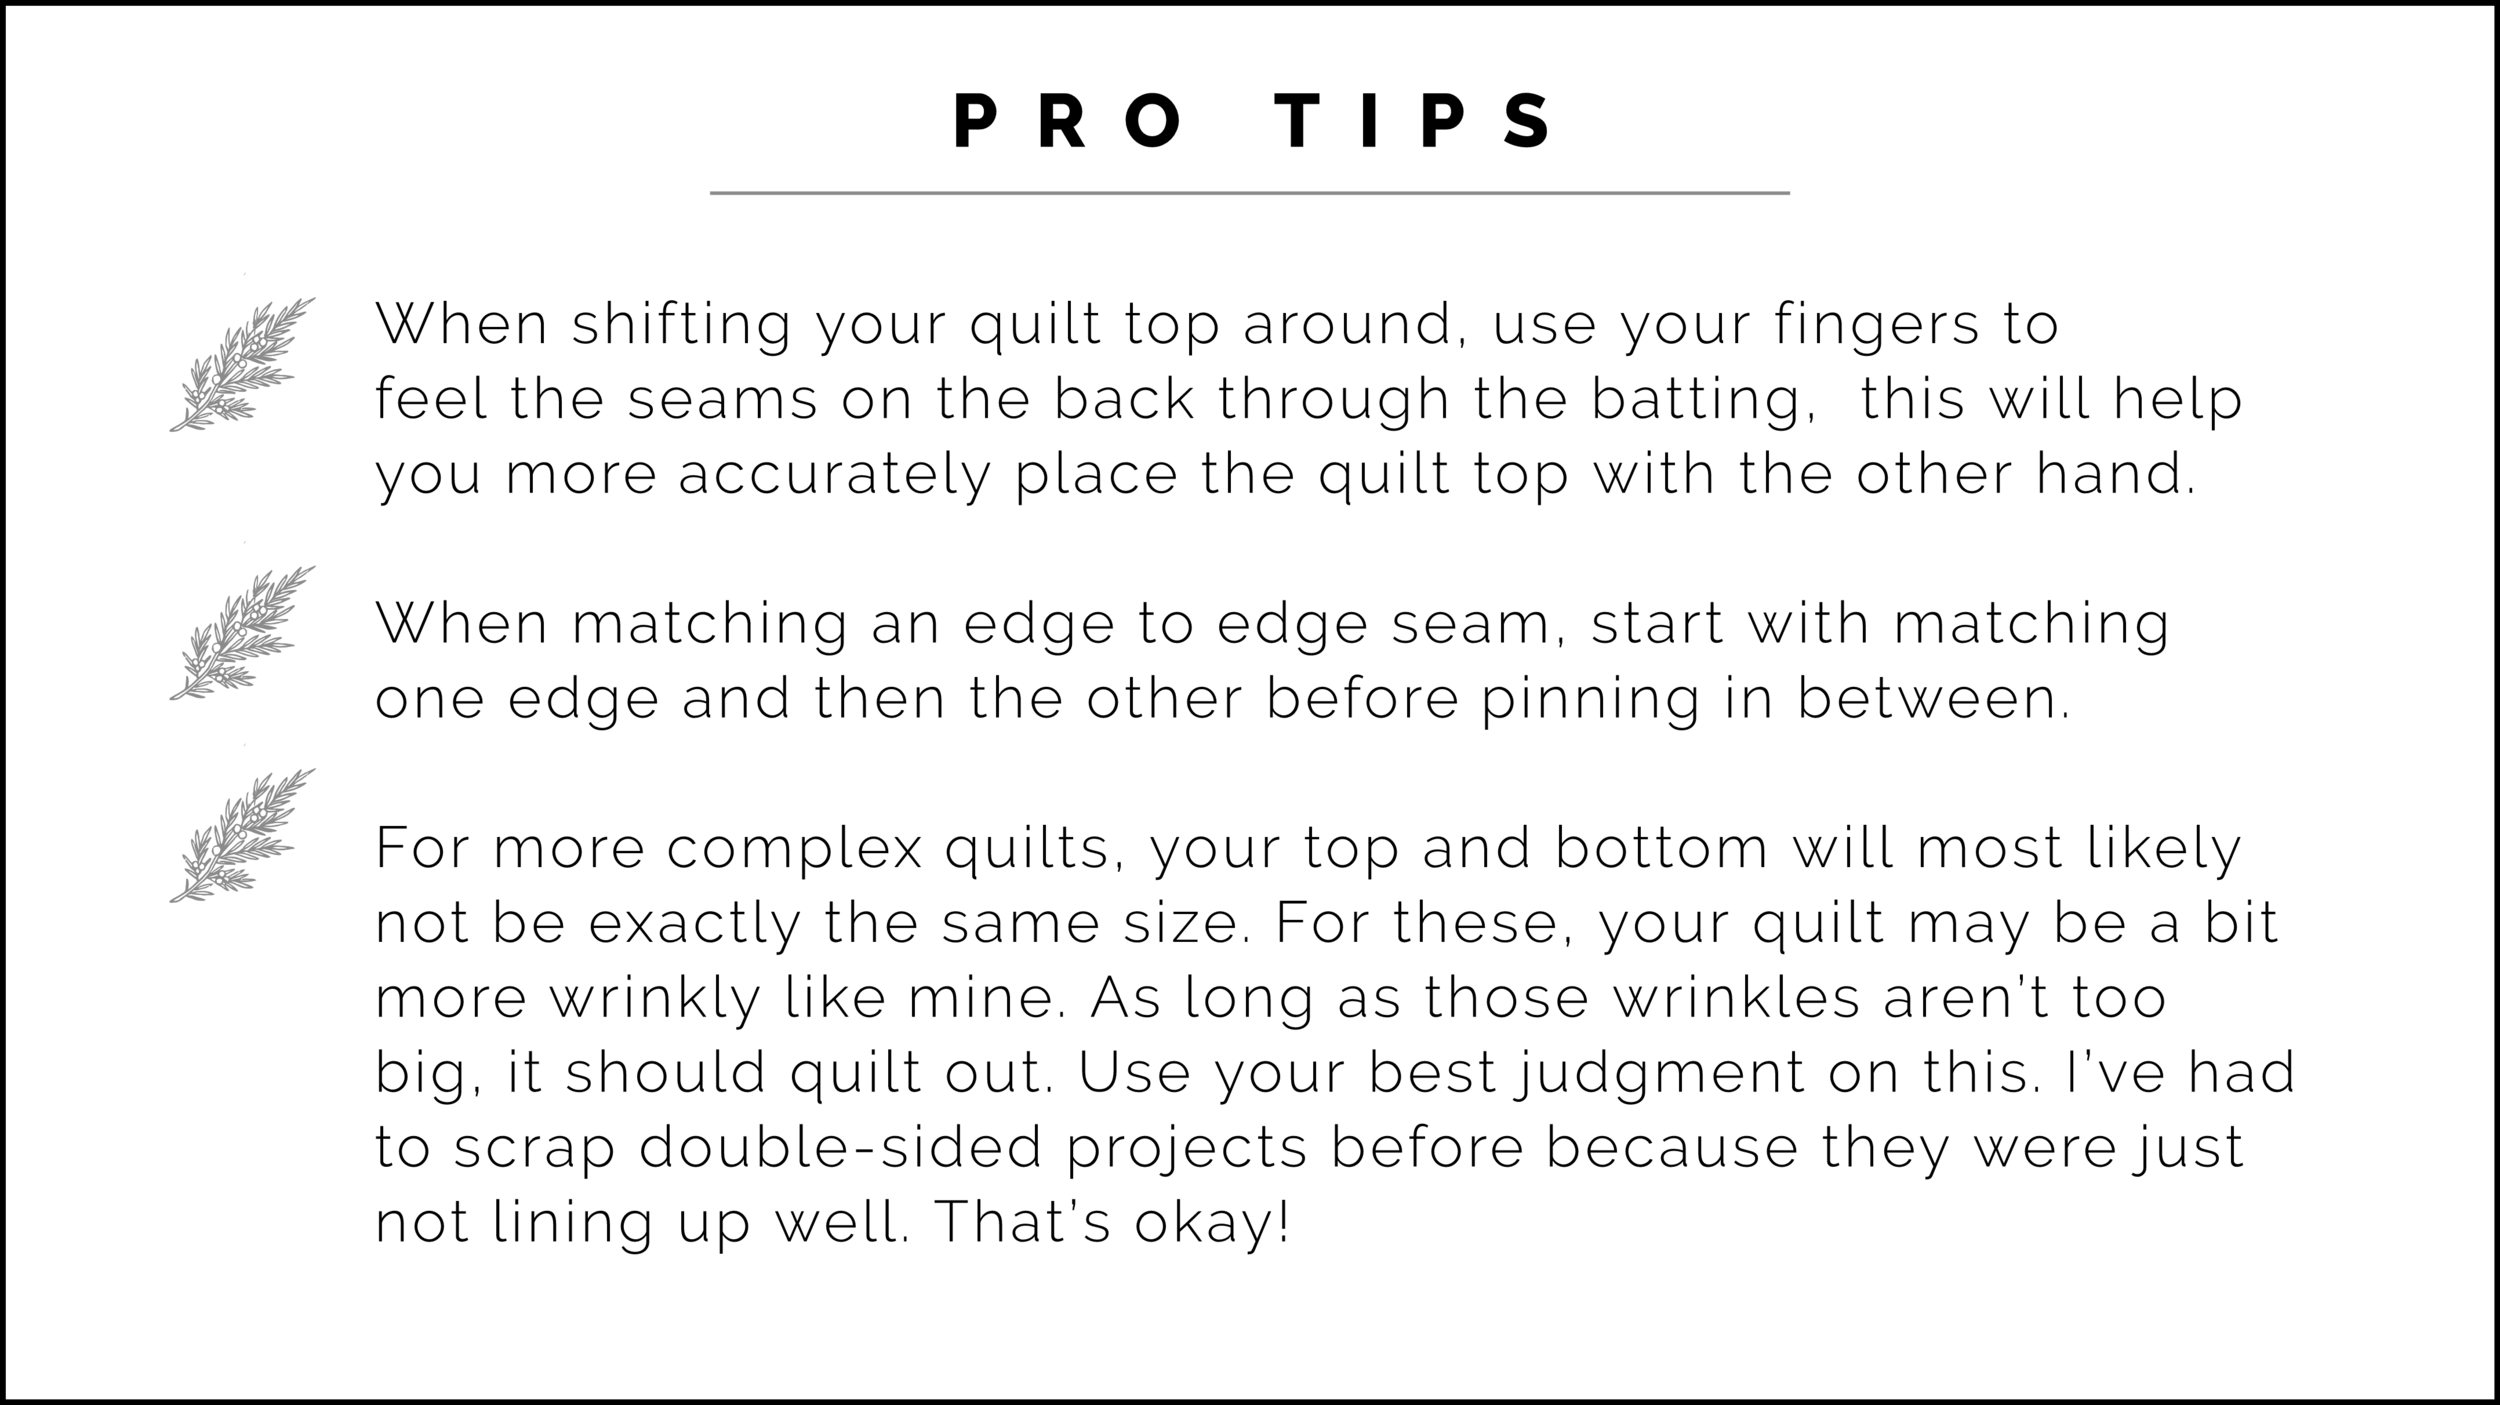 My best tip for lining getting your checklist perfectly aligned every